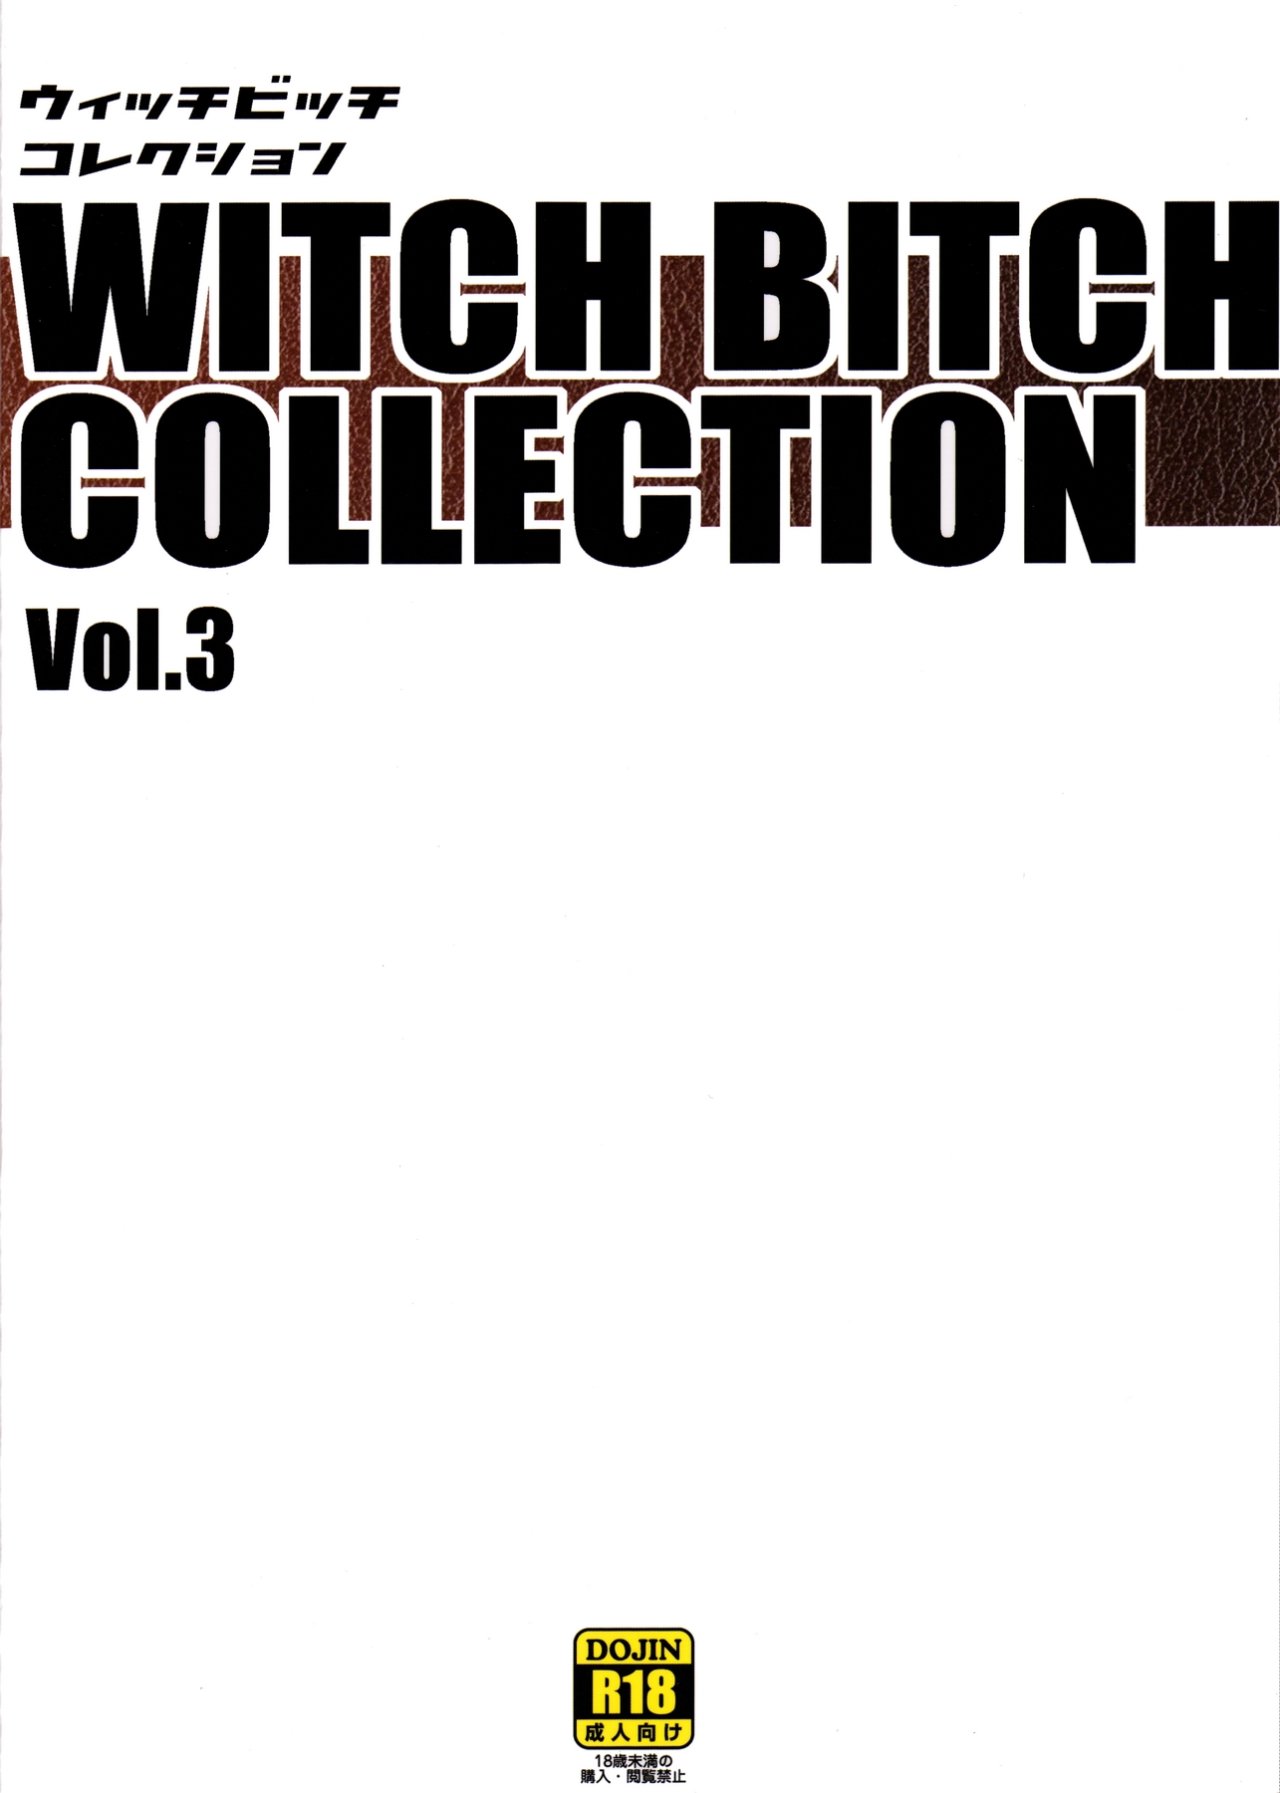 Witch Bitch Collection Vol 3 - 28